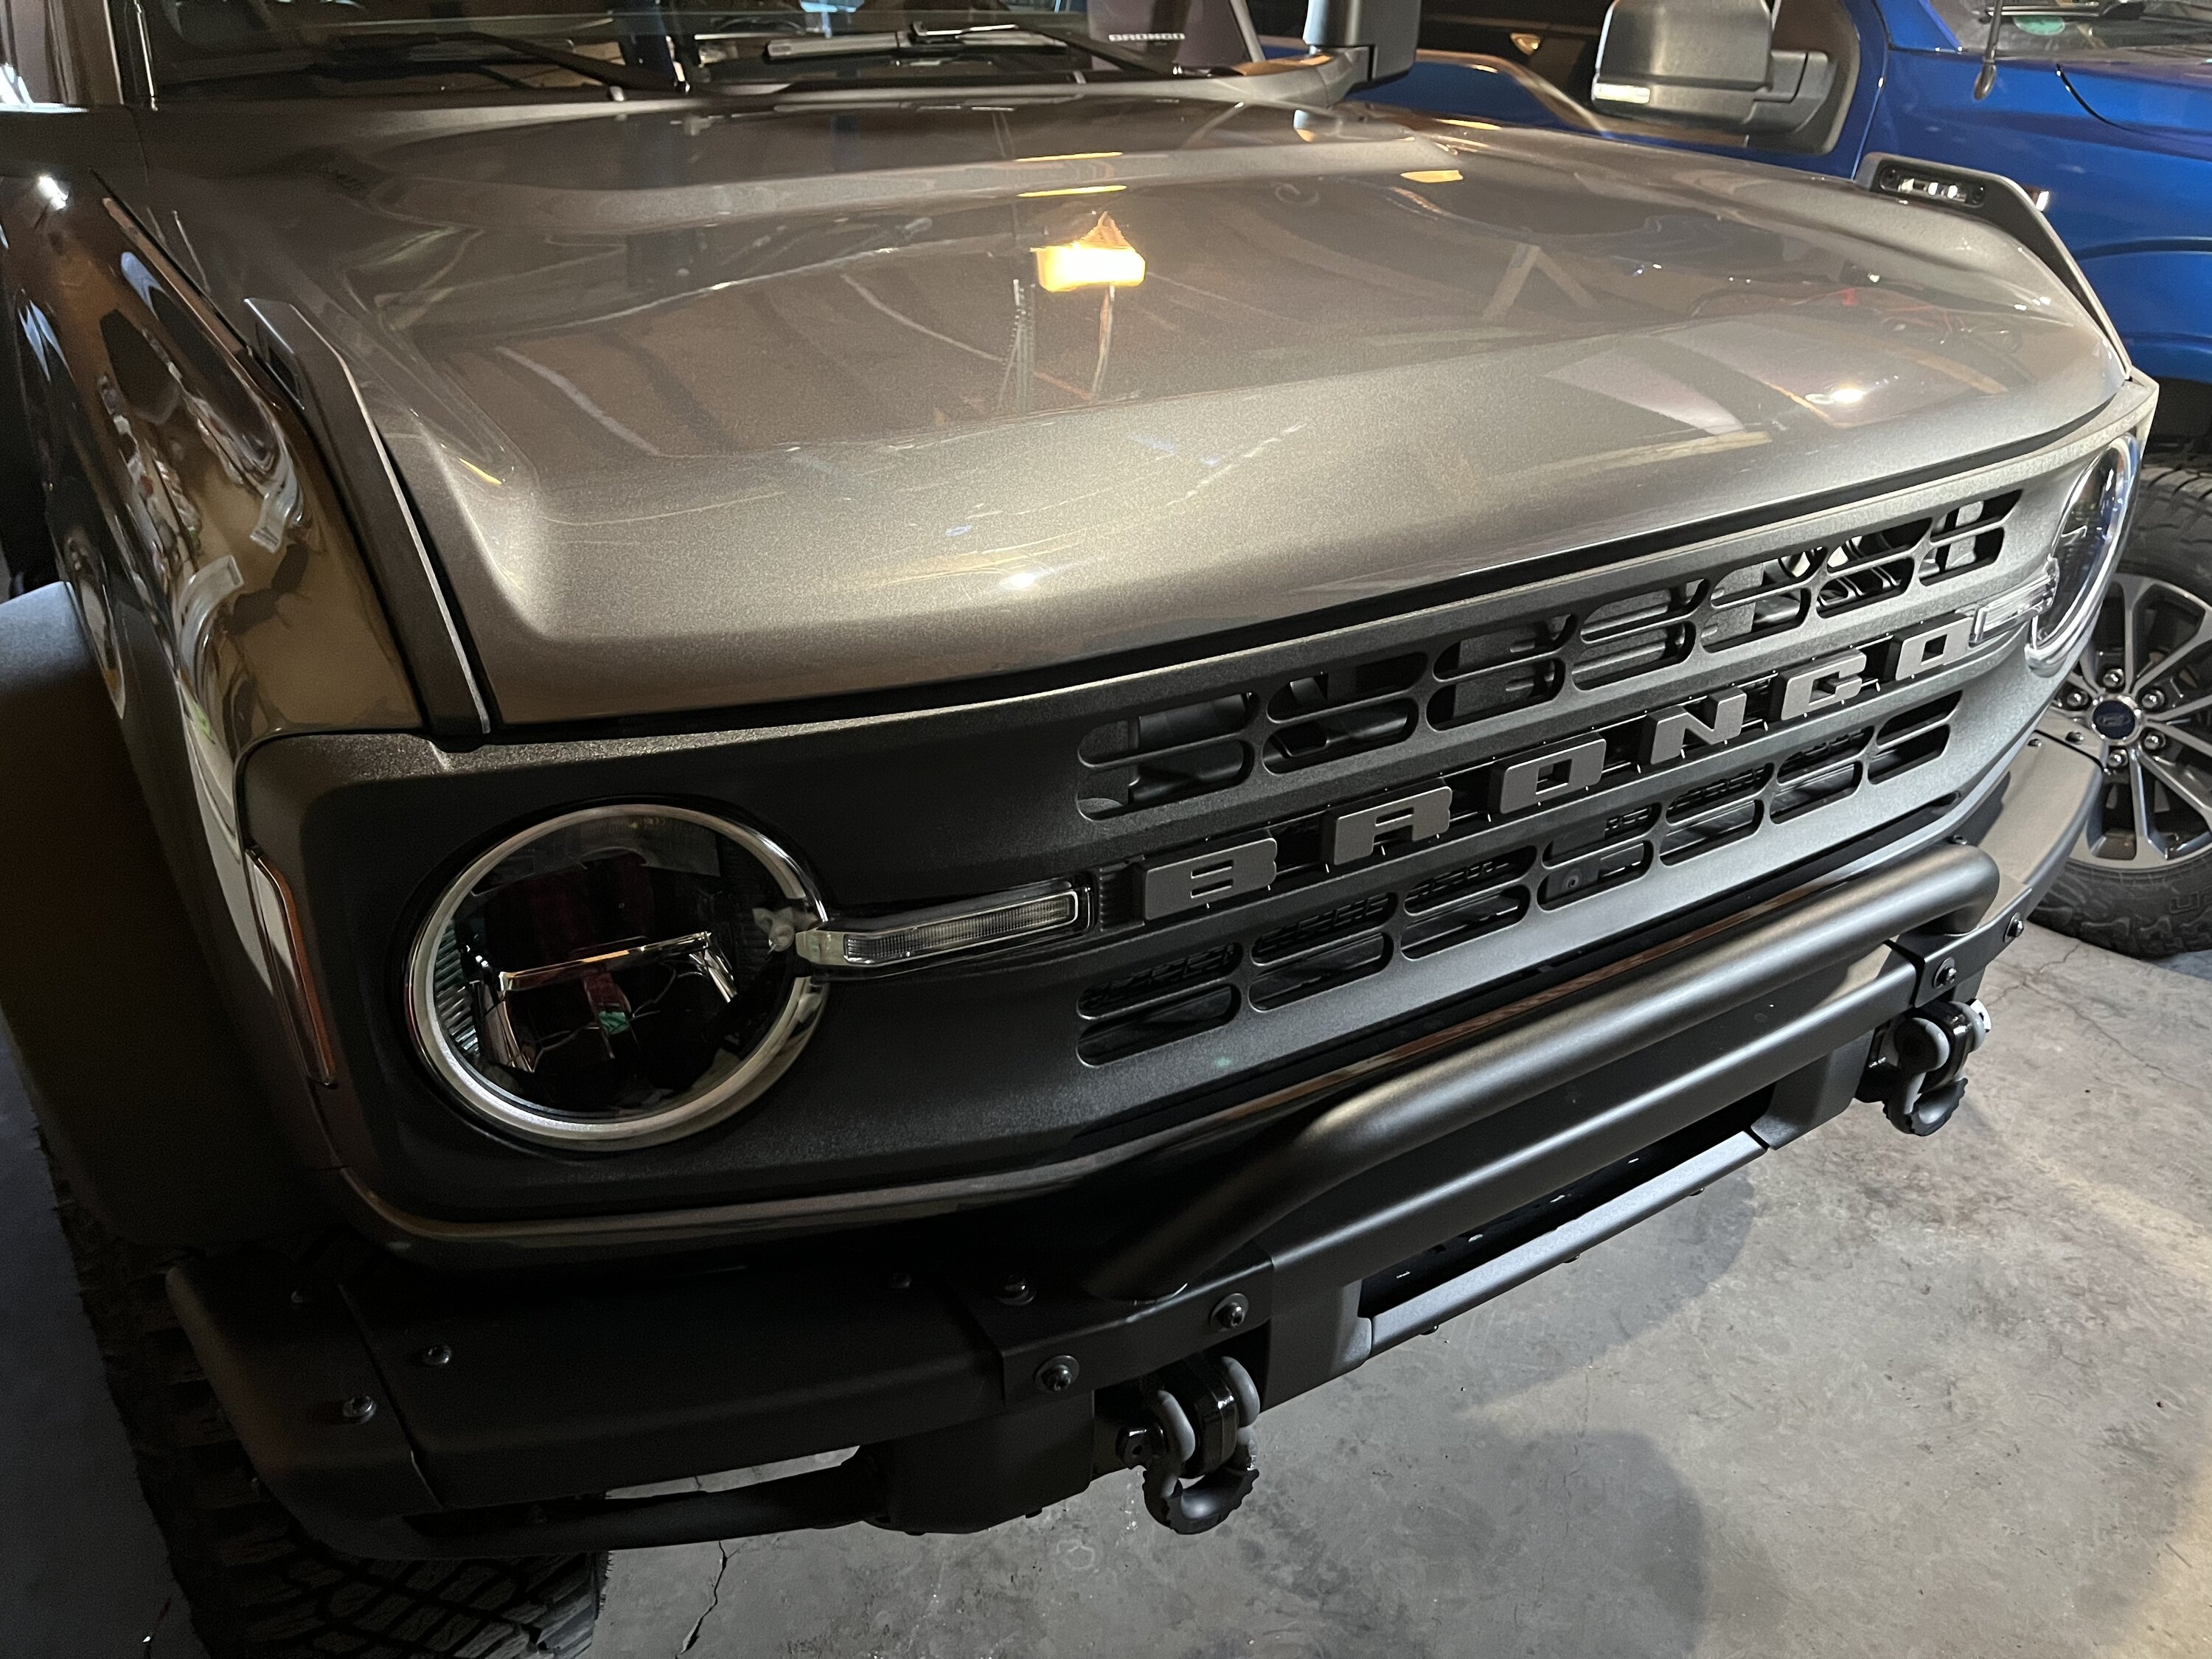 Ford Bronco Color matched Bronco letter covers 93BCA415-F6DF-4B86-8025-786FD9D11BAA